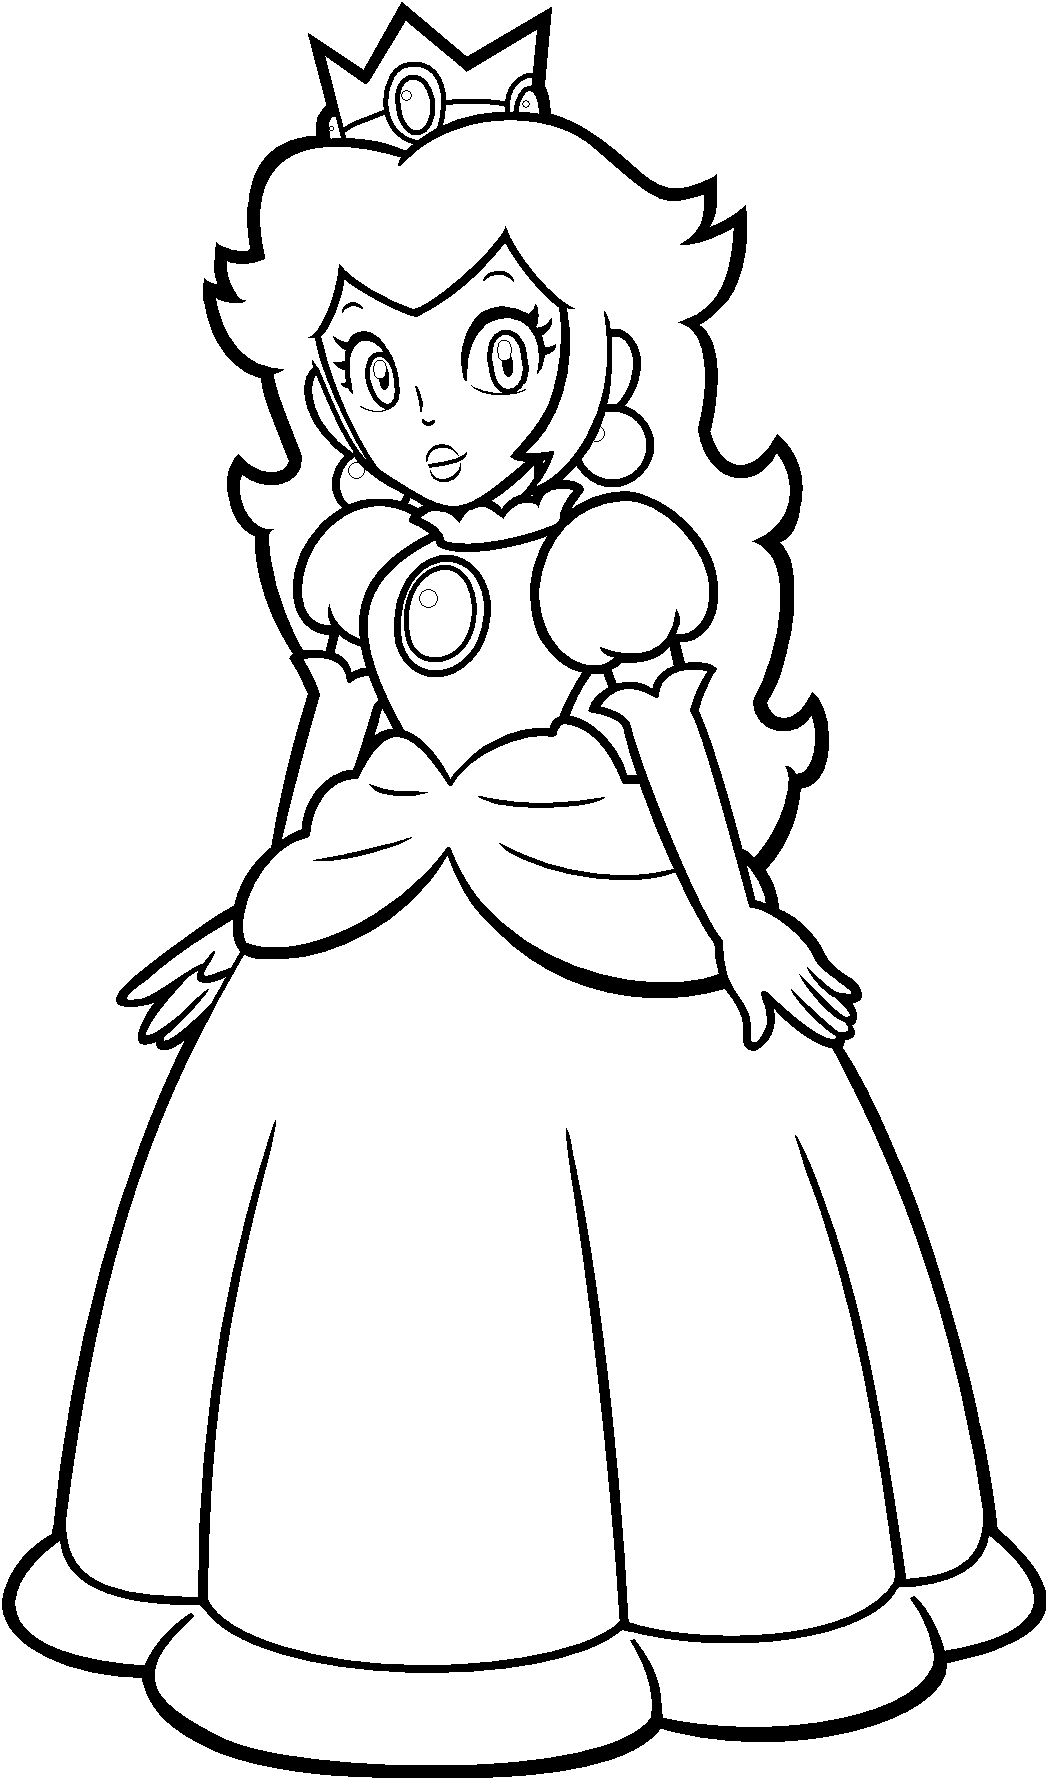 Free Printable Princess Peach Coloring Pages